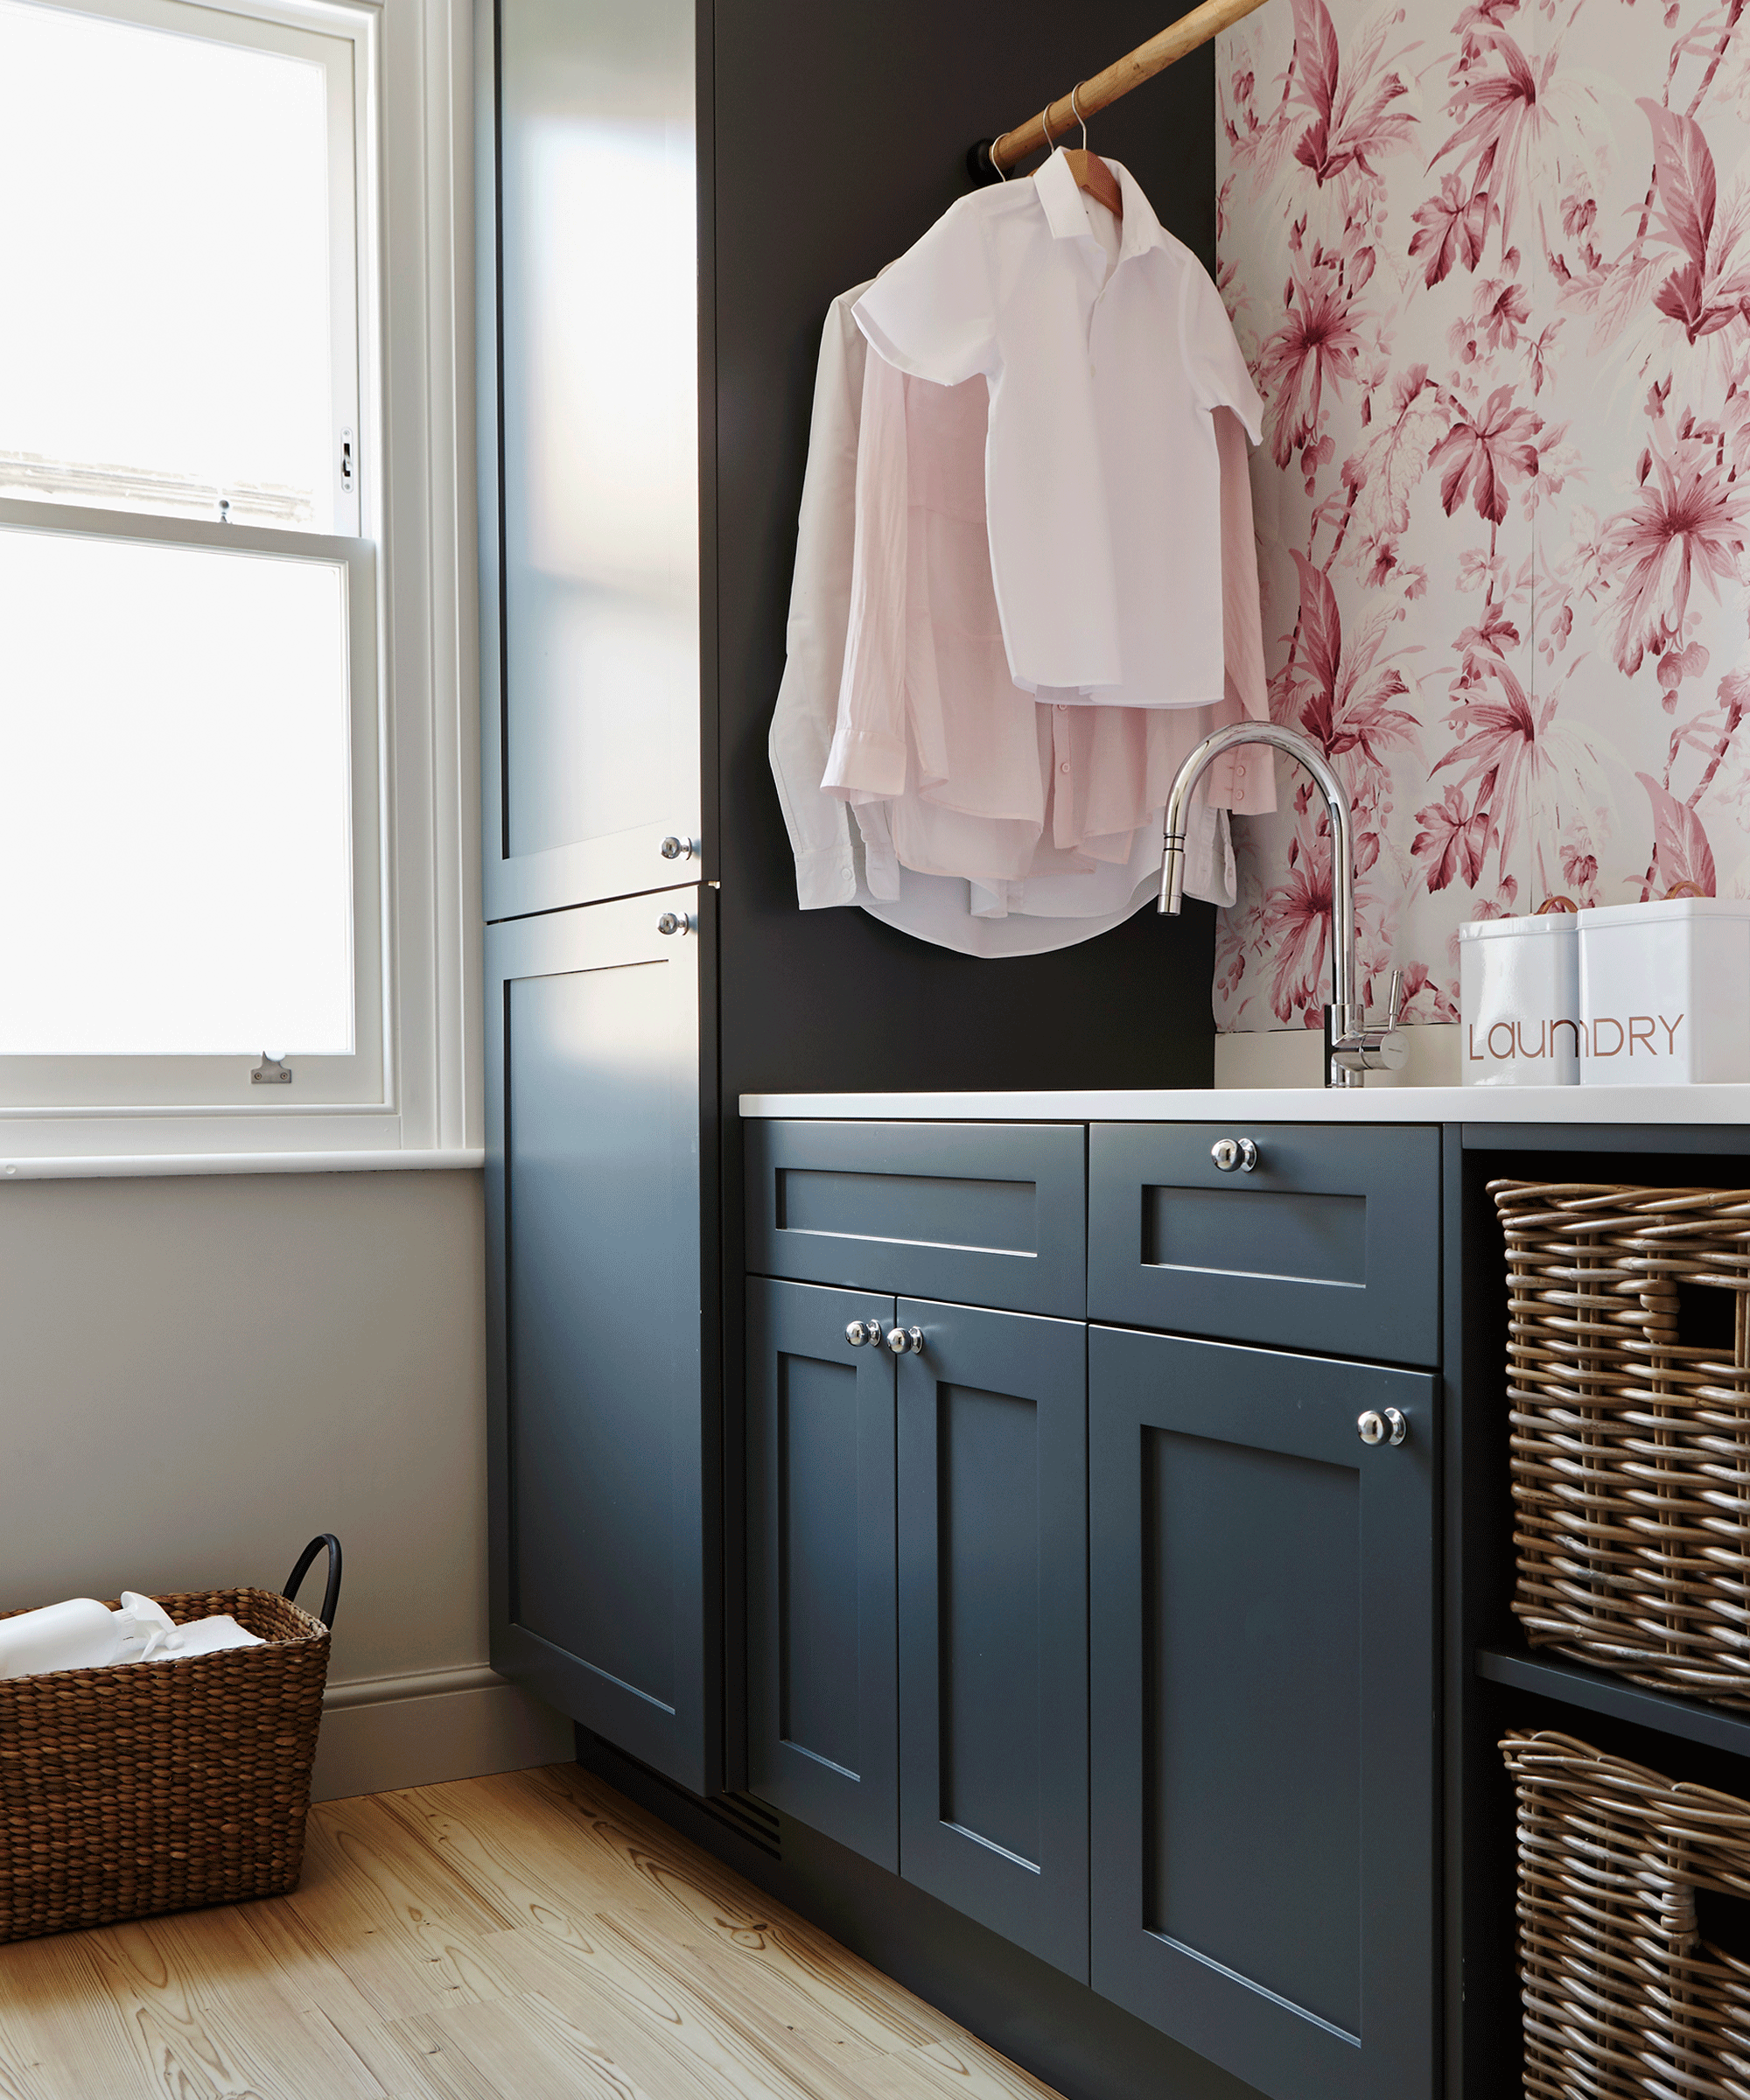 laundry room with shirts hanging